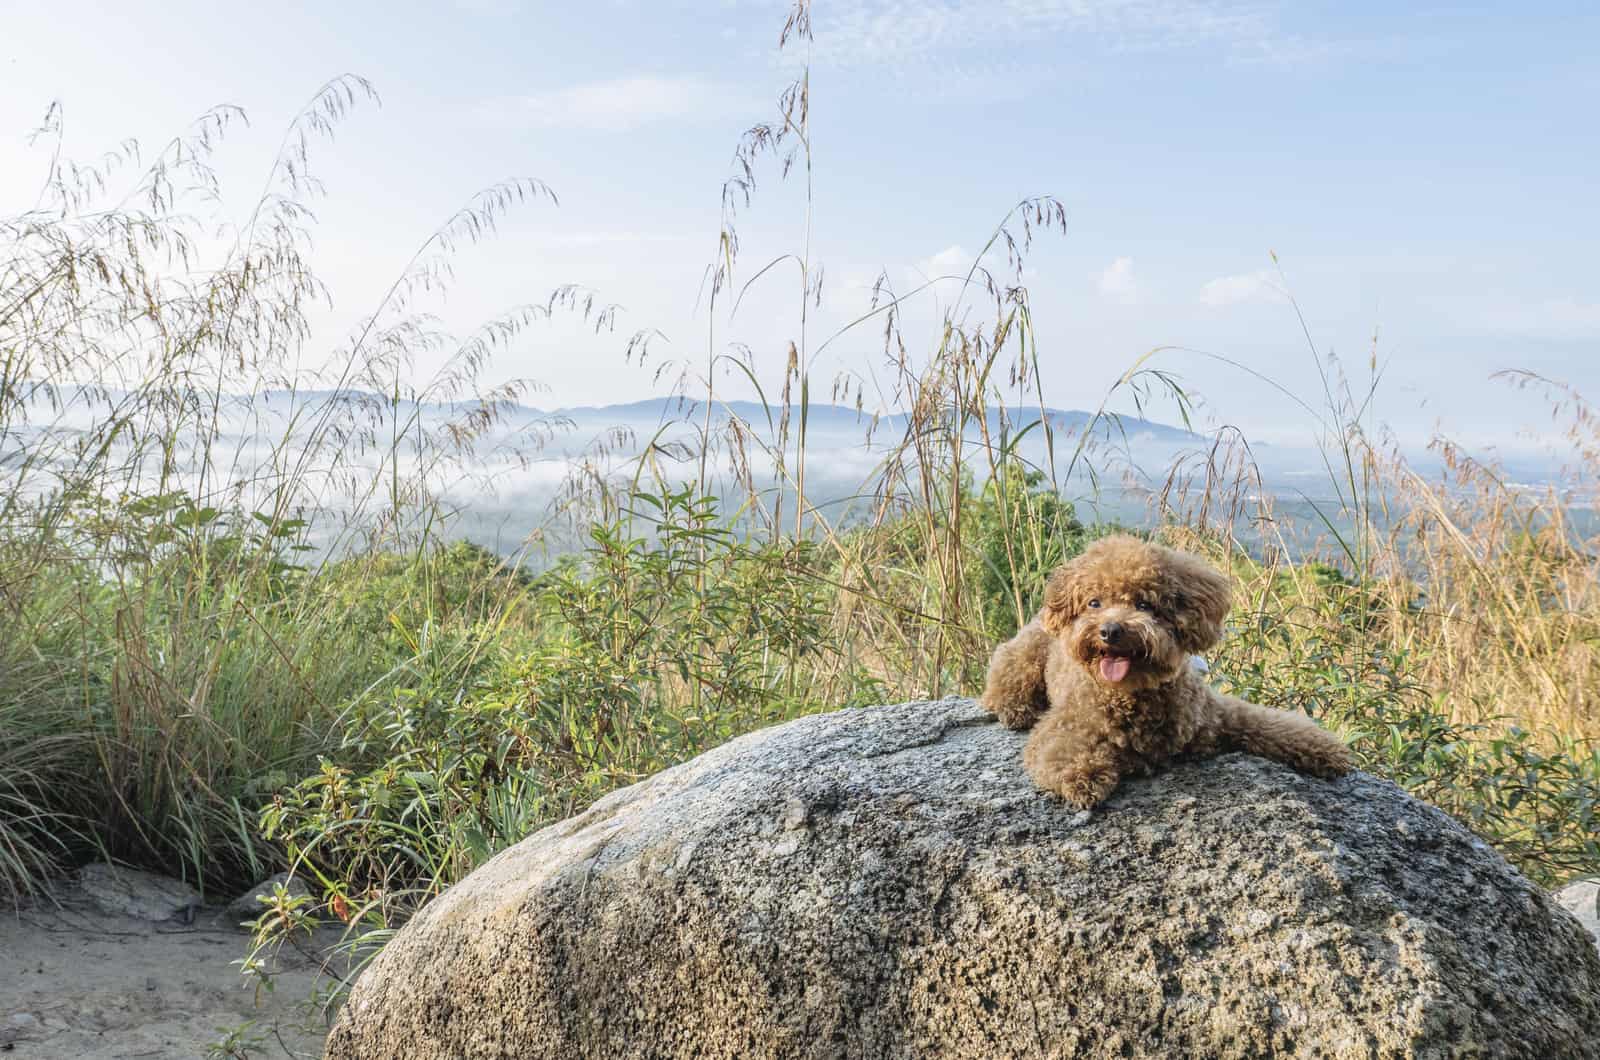 Toy Poddle resting on rock after hiking